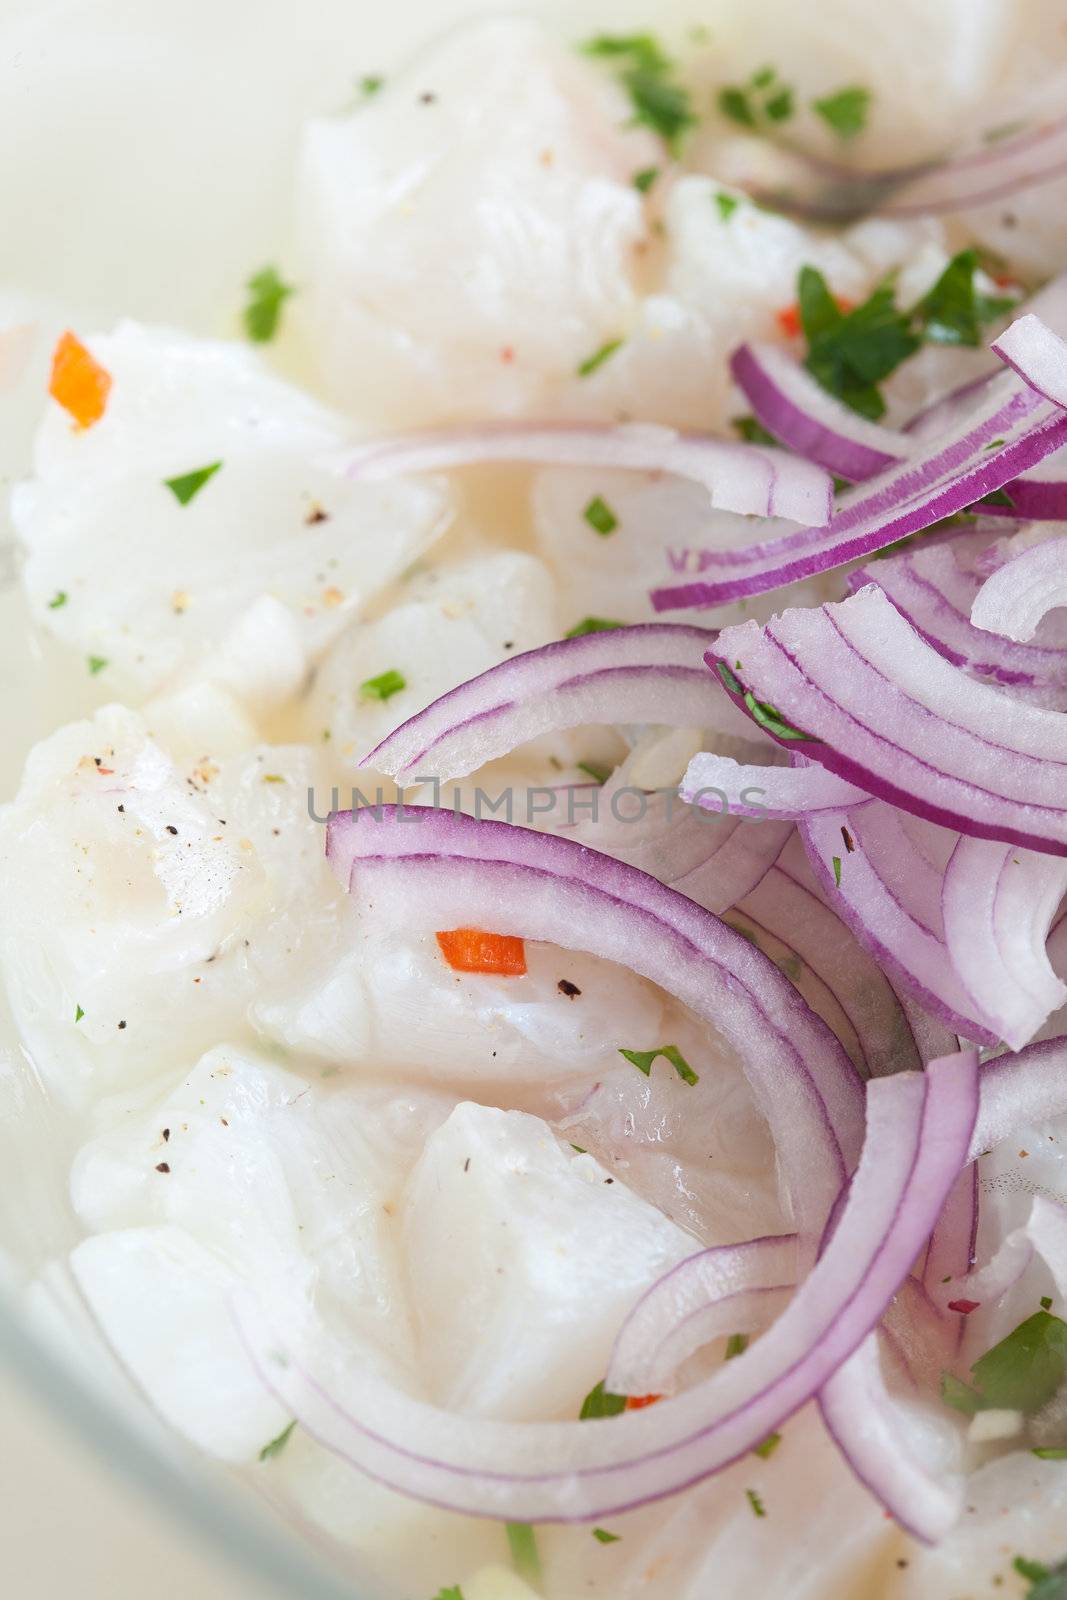 Marinating bowl of ceviche with cod, onions and cilantro